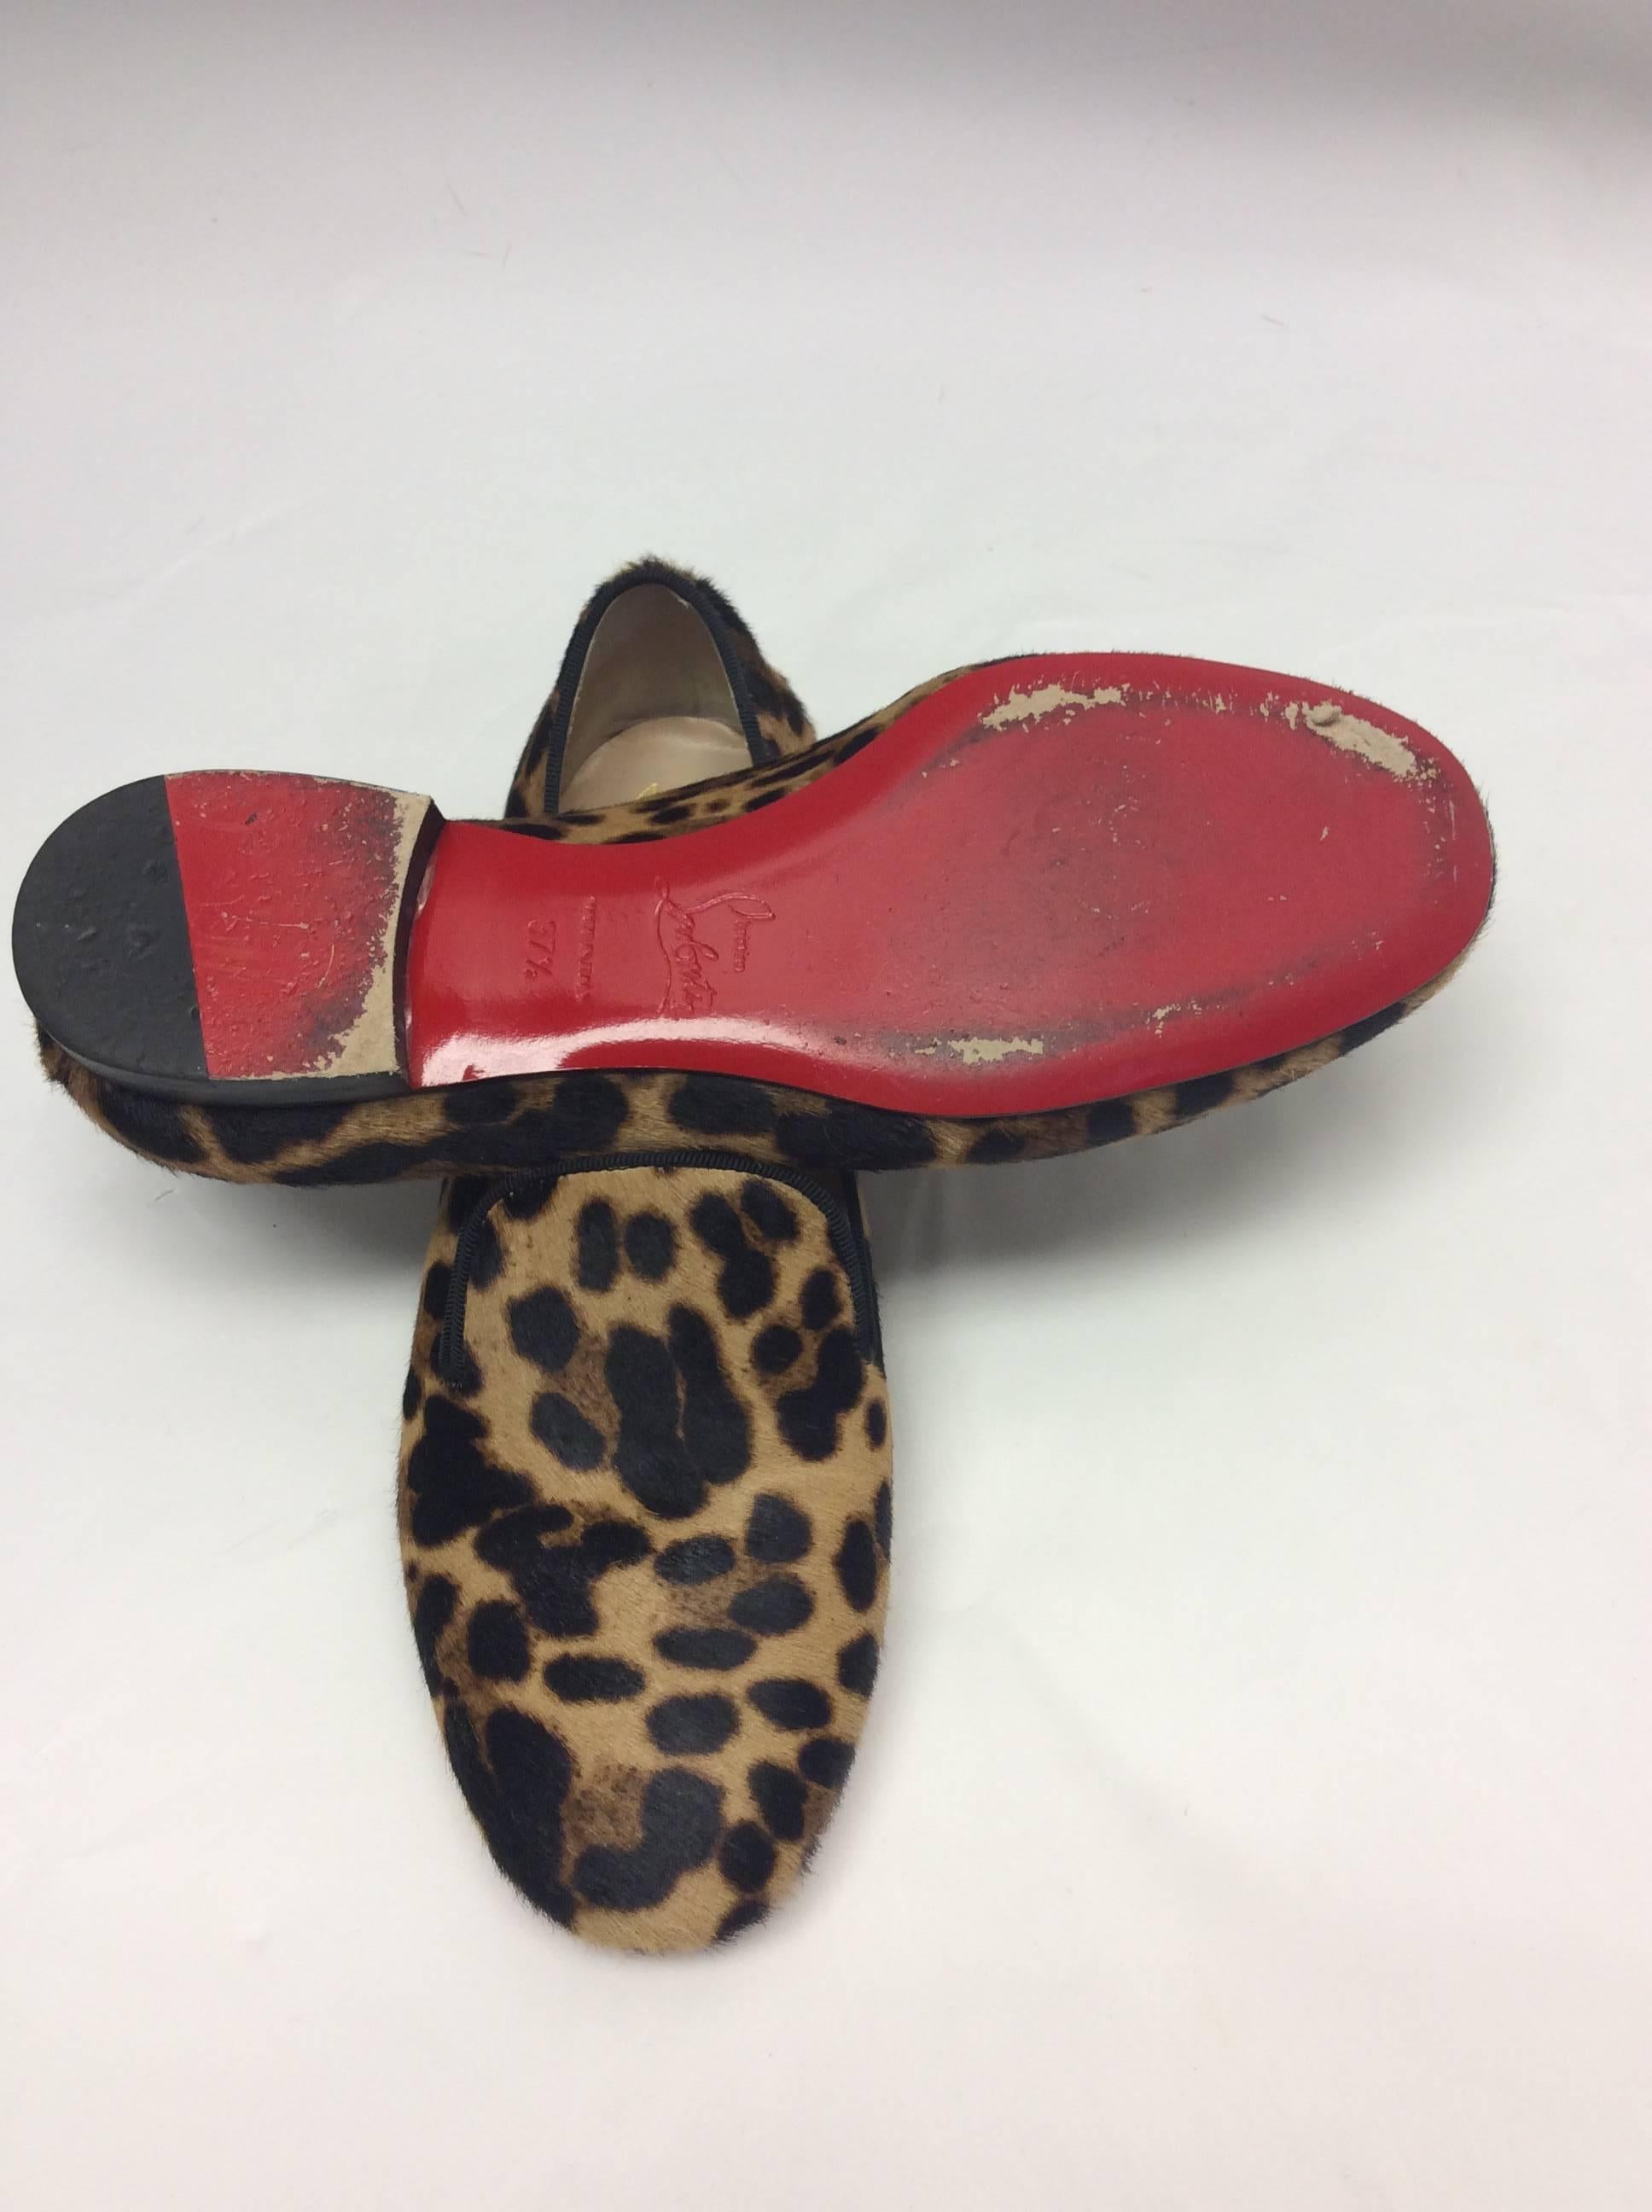 Christian Louboutin Leopard Loafers In Excellent Condition For Sale In Narberth, PA